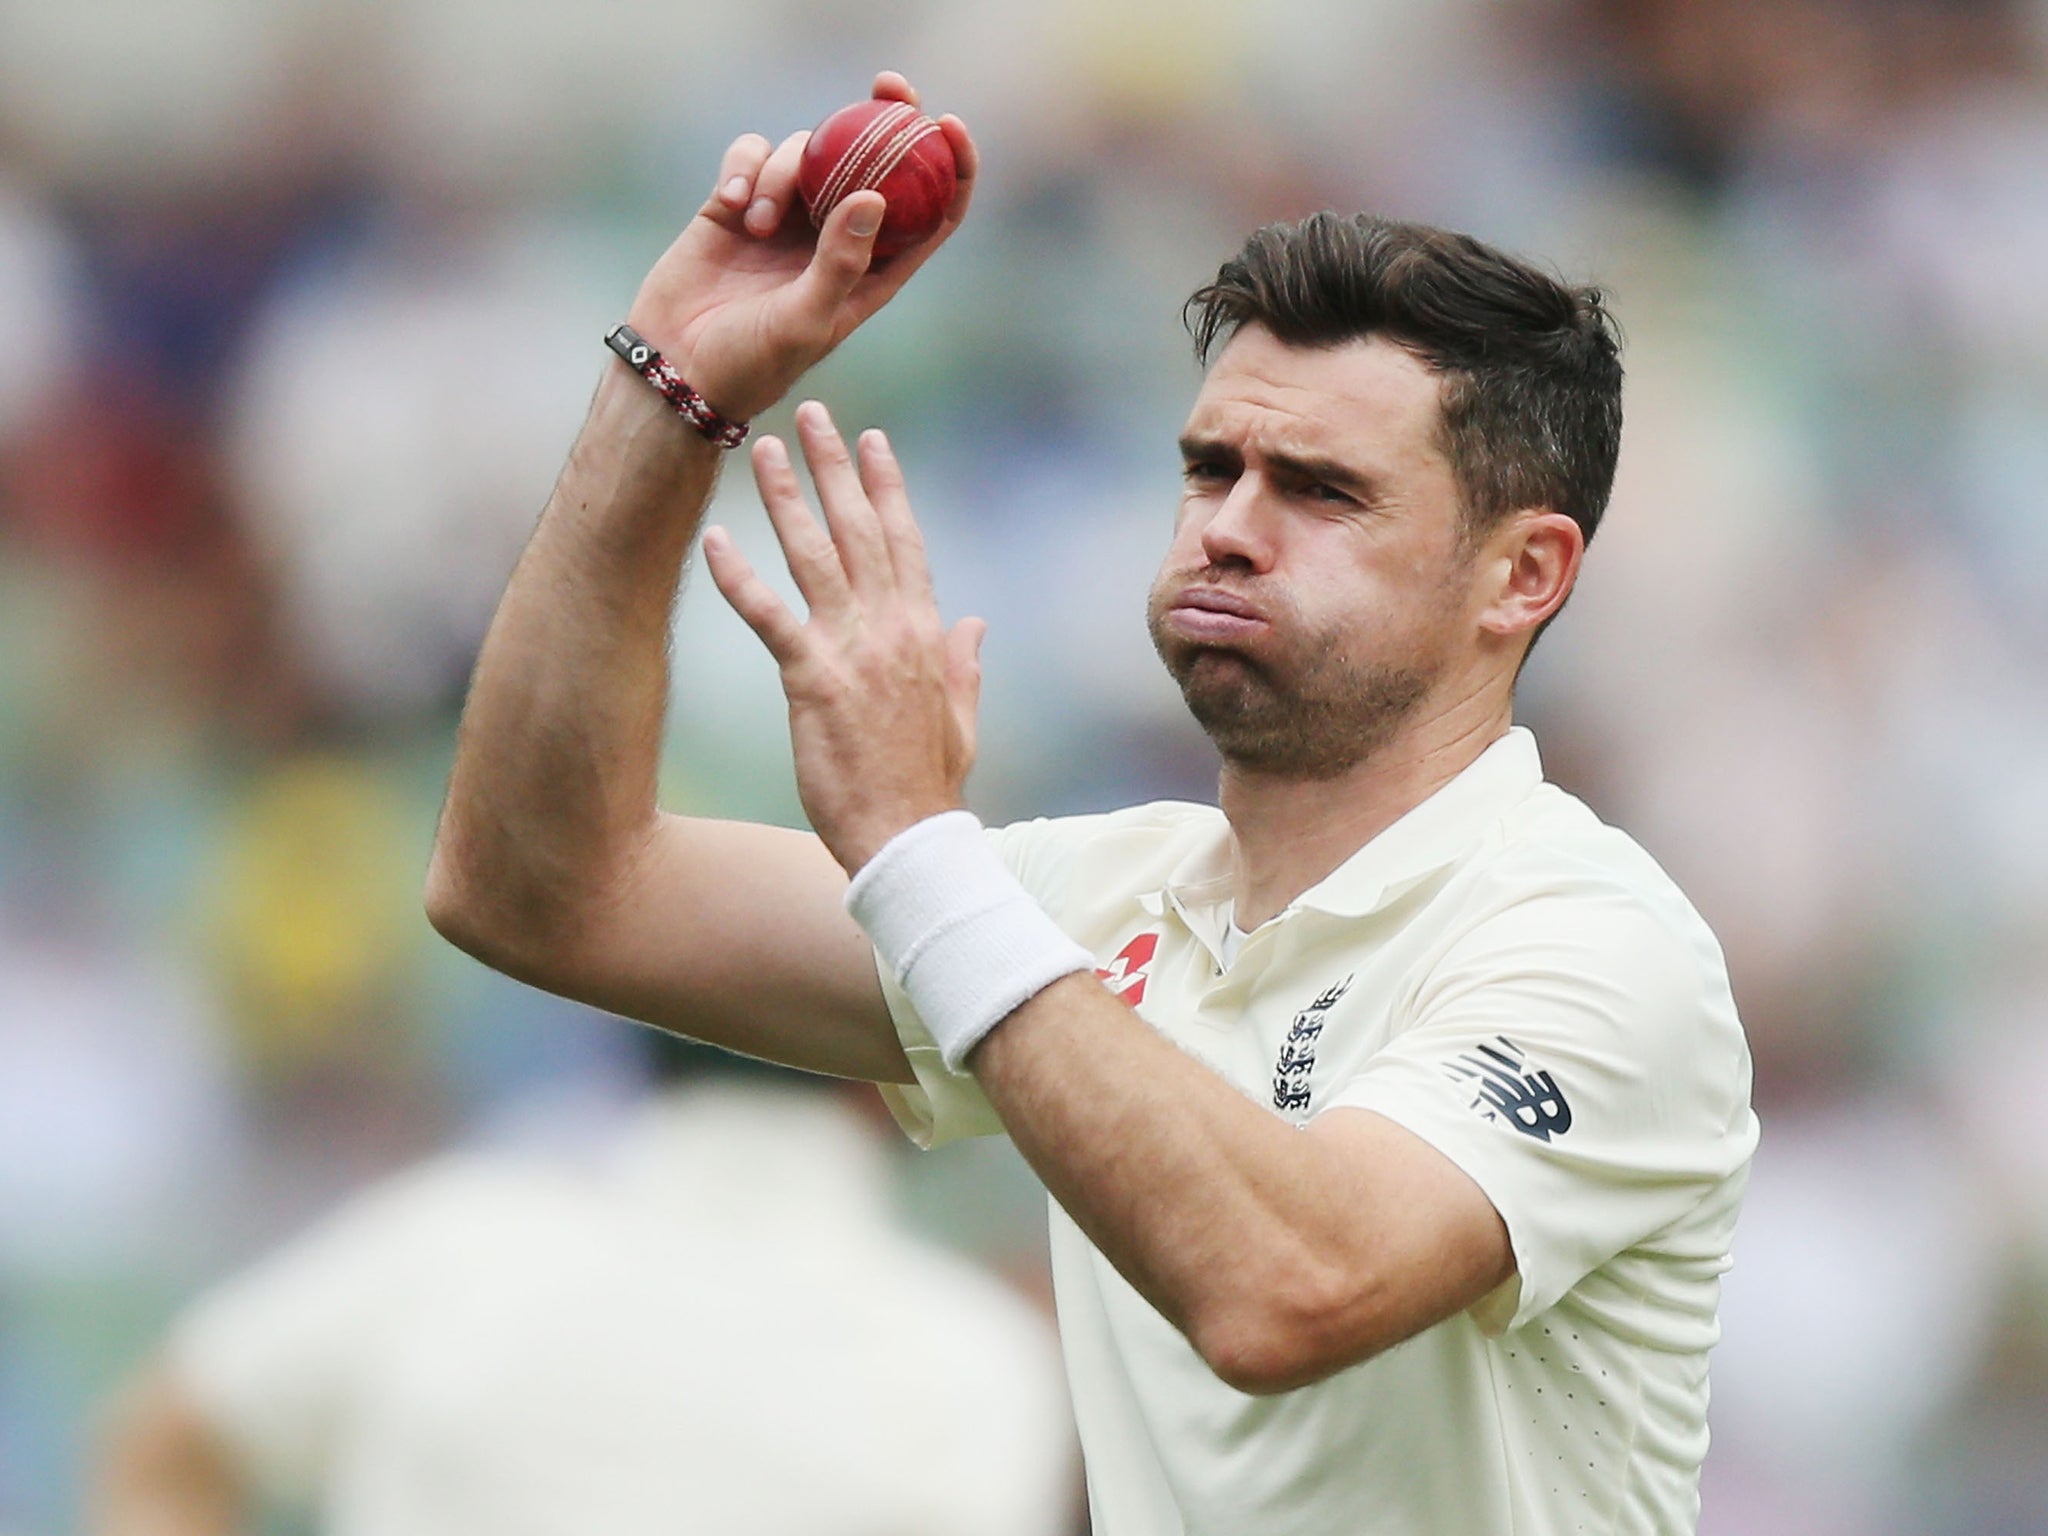 Anderson looks set to play his final Test in Australia in Sydney